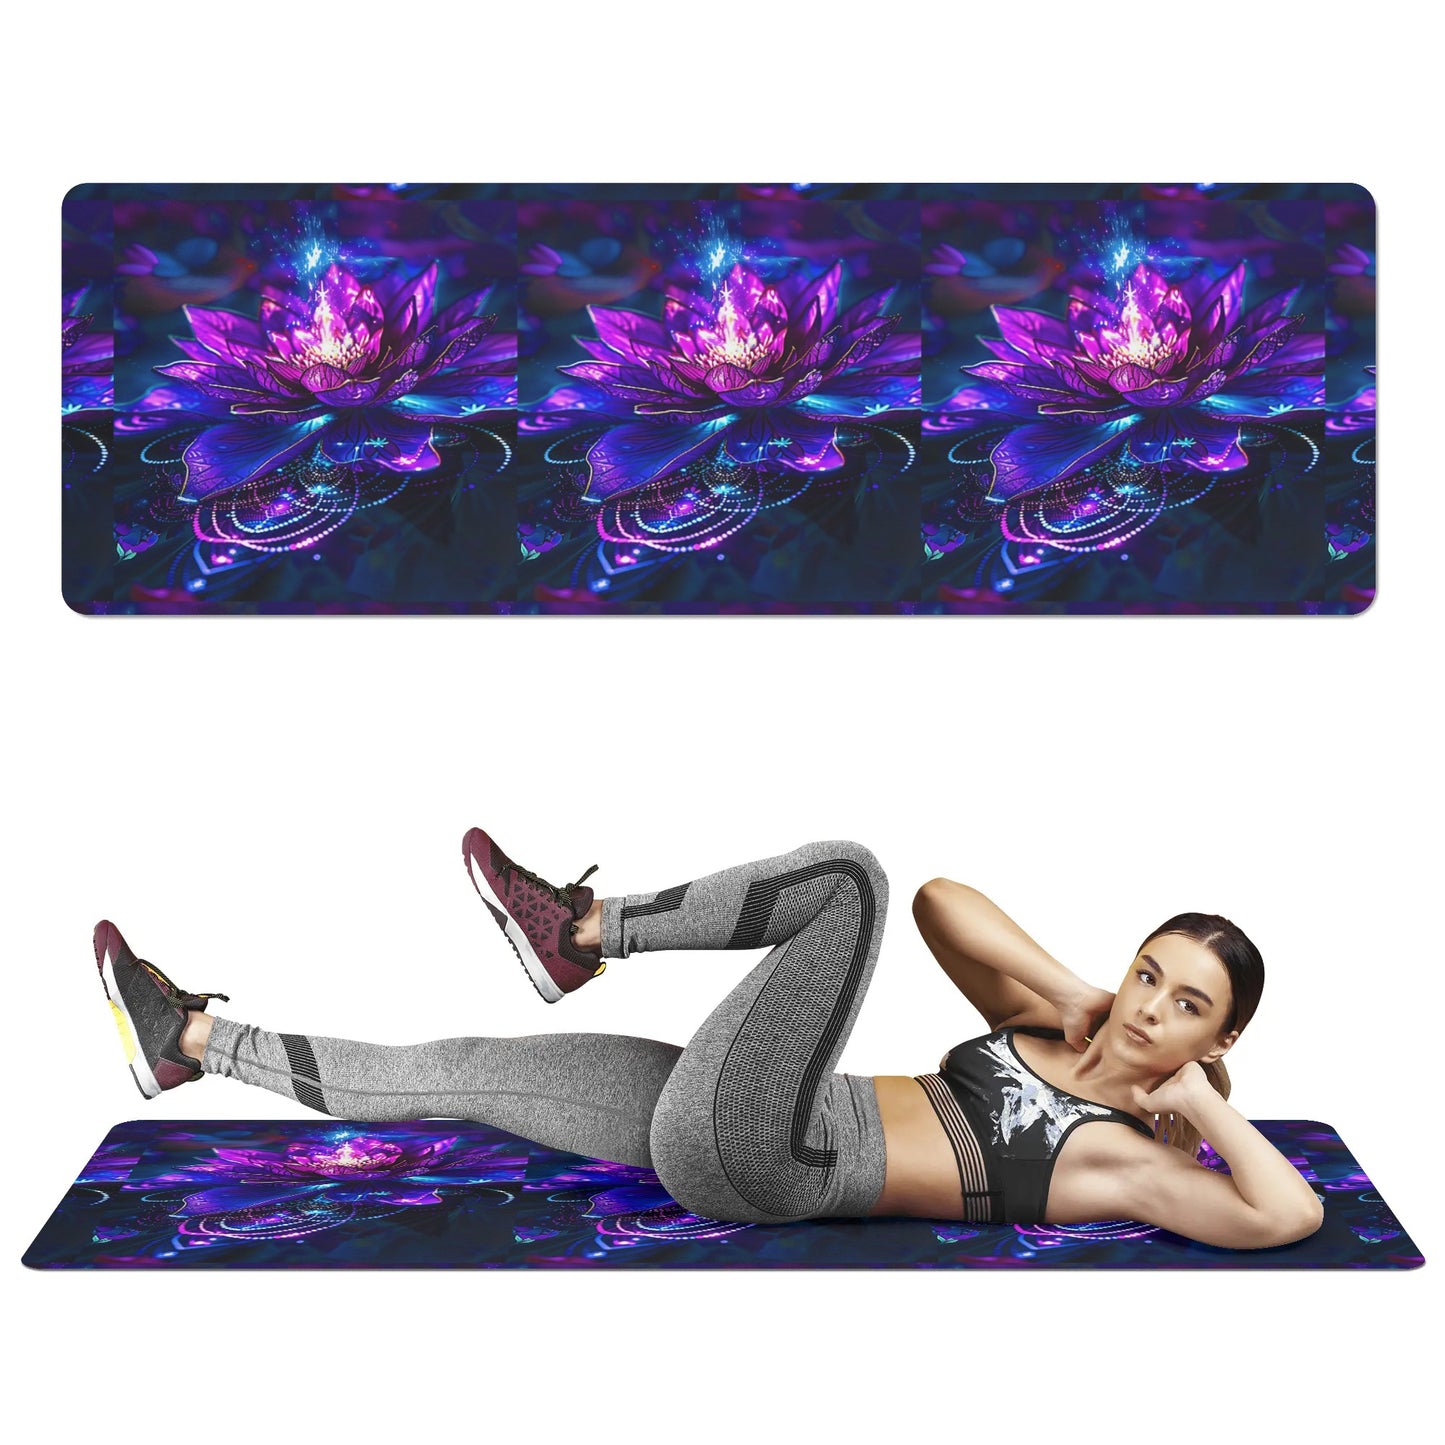 D'Sare Vibrant Collection: Colorful Yoga Mats for Inspired Practices